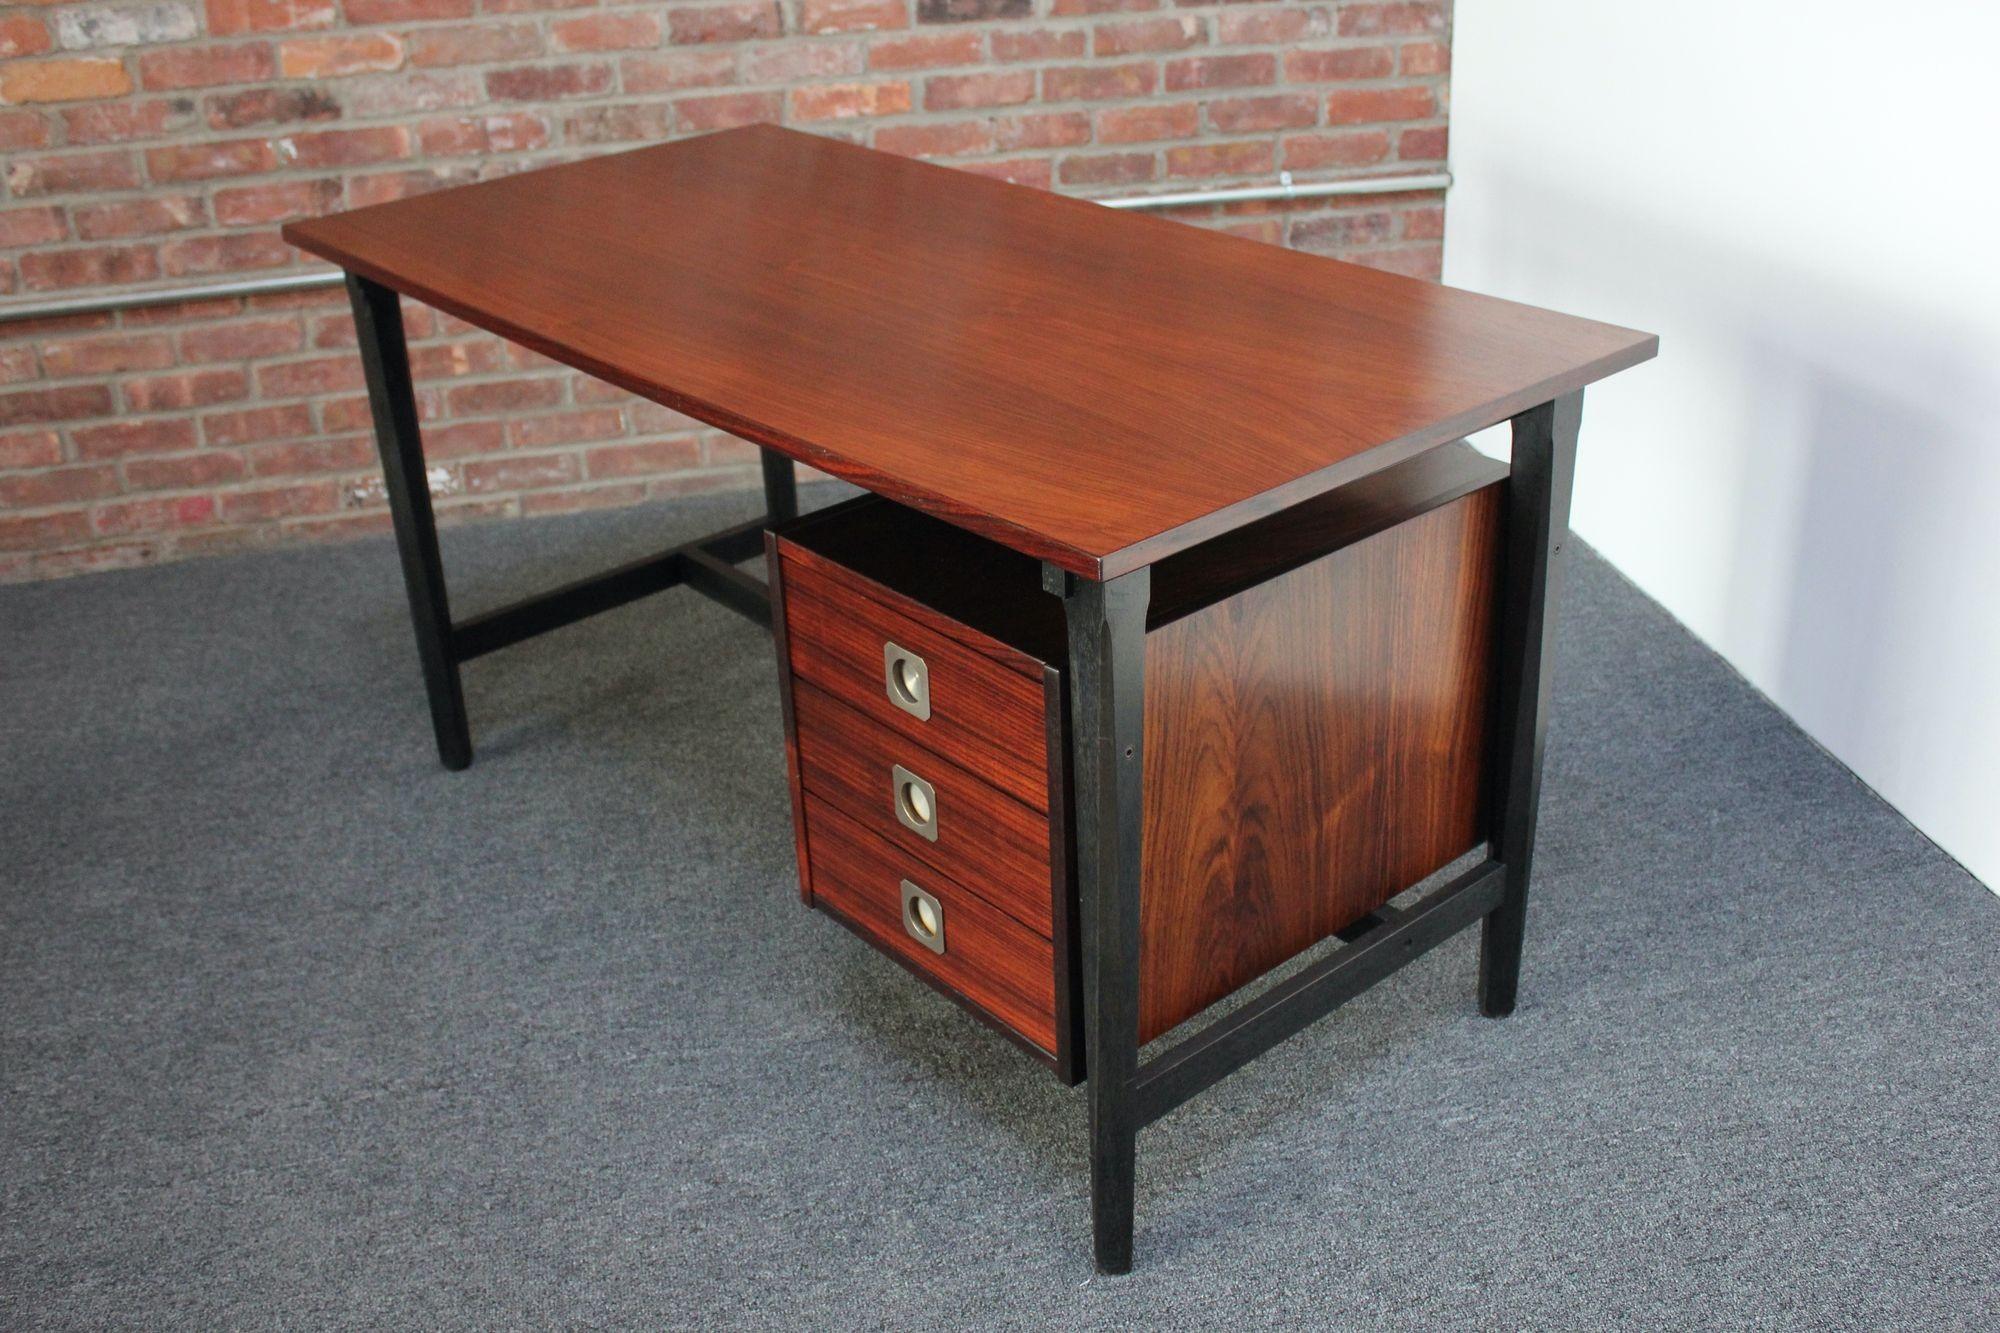 Single-pedestal rosewood desk with ebonized legs and chrome-plated brass recessed pulls by Stildomus (ca. 1950s, Italy). 
Features three dove-tailed drawers with interior dimensions measuring: H: 3.5